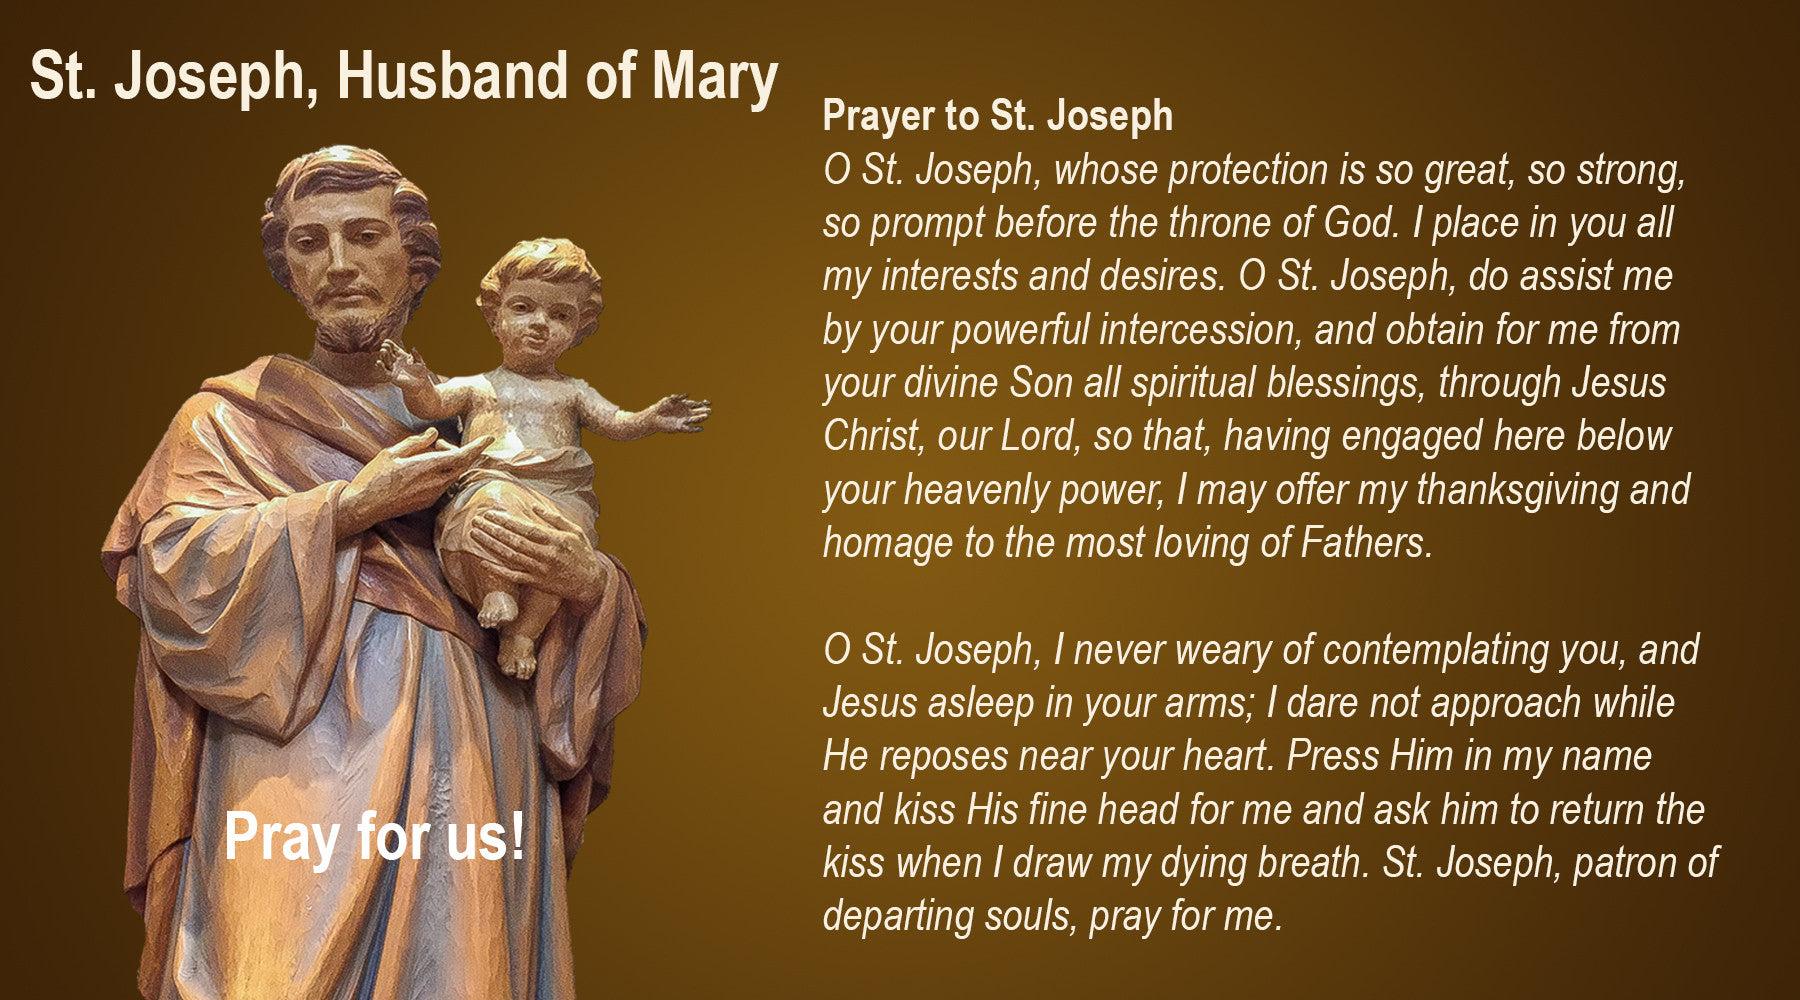 St. Joseph Day, Husband of Mary March 19